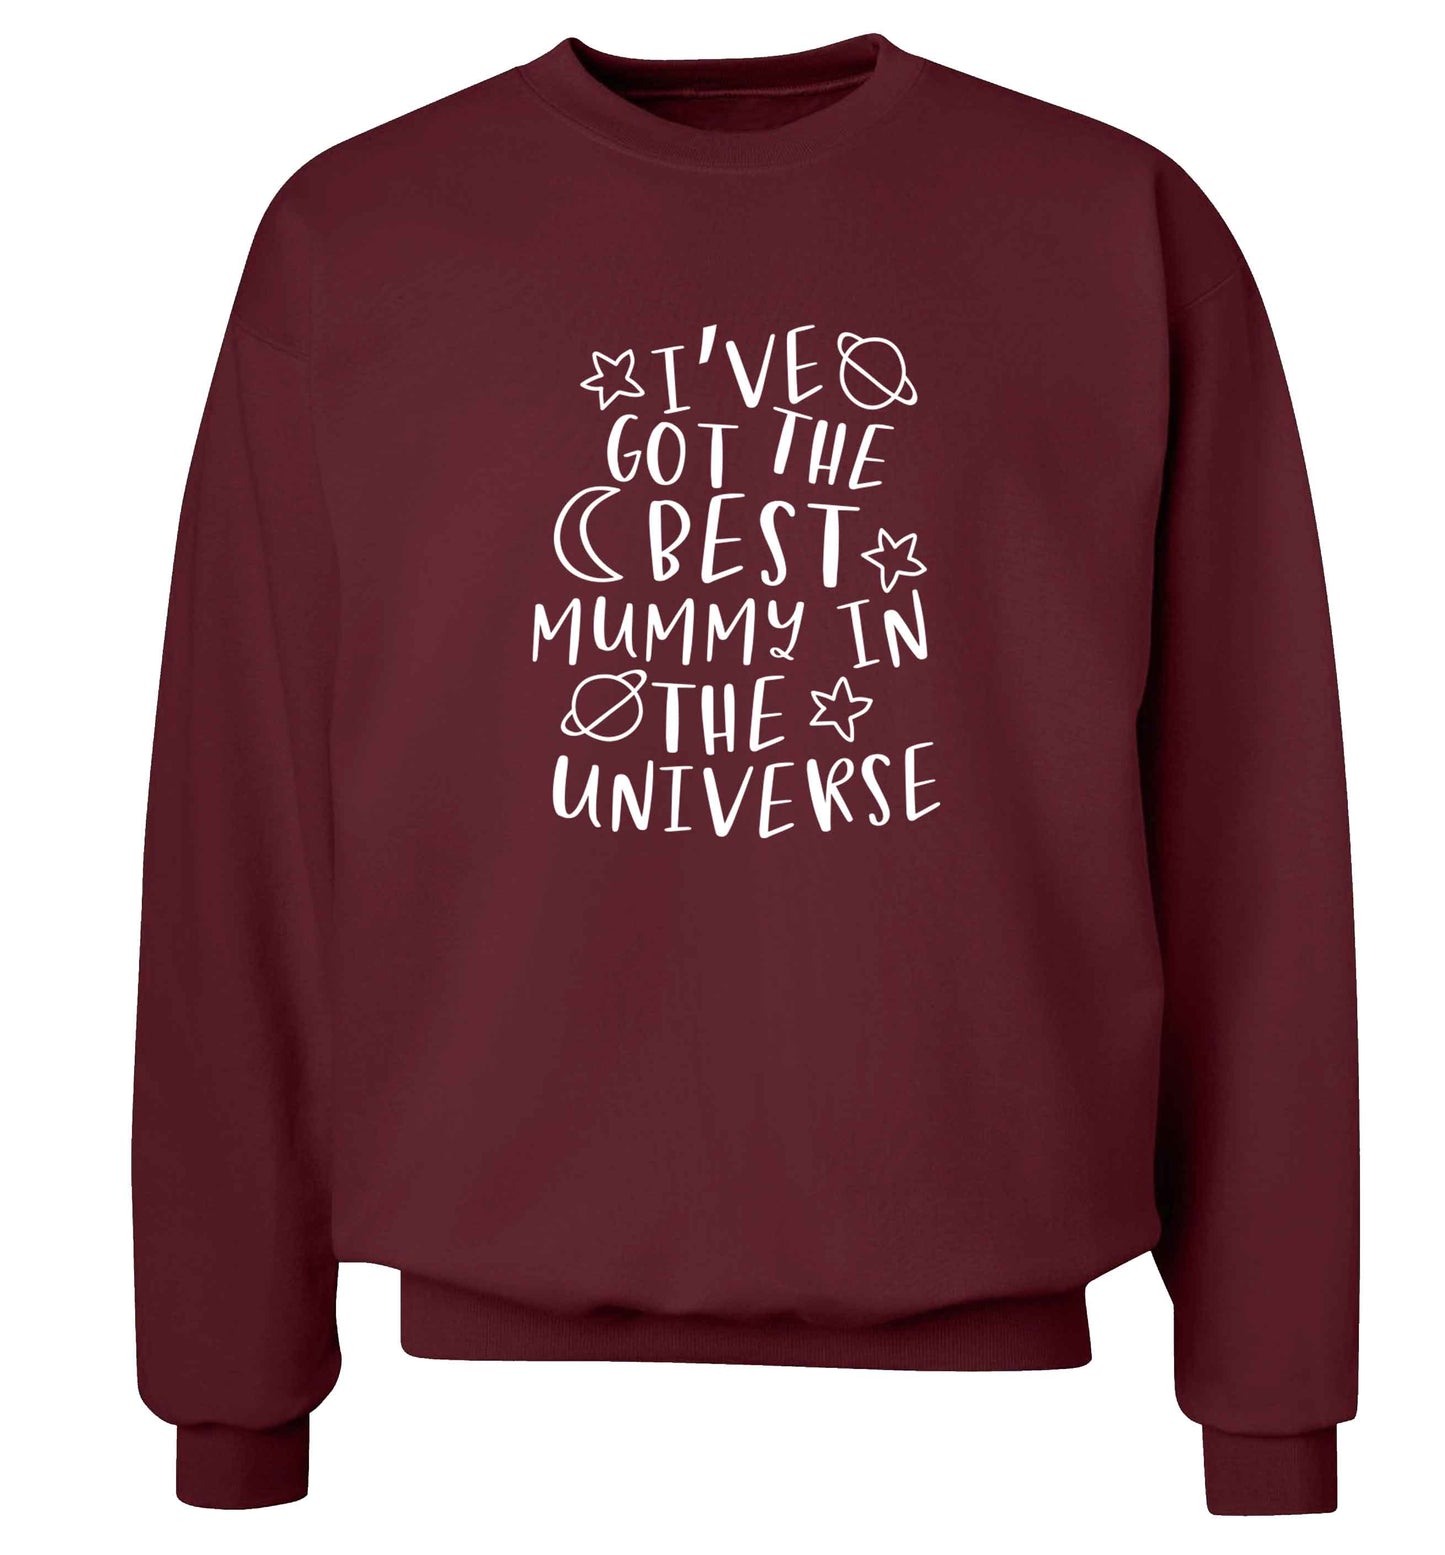 I've got the best mummy in the universe adult's unisex maroon sweater 2XL